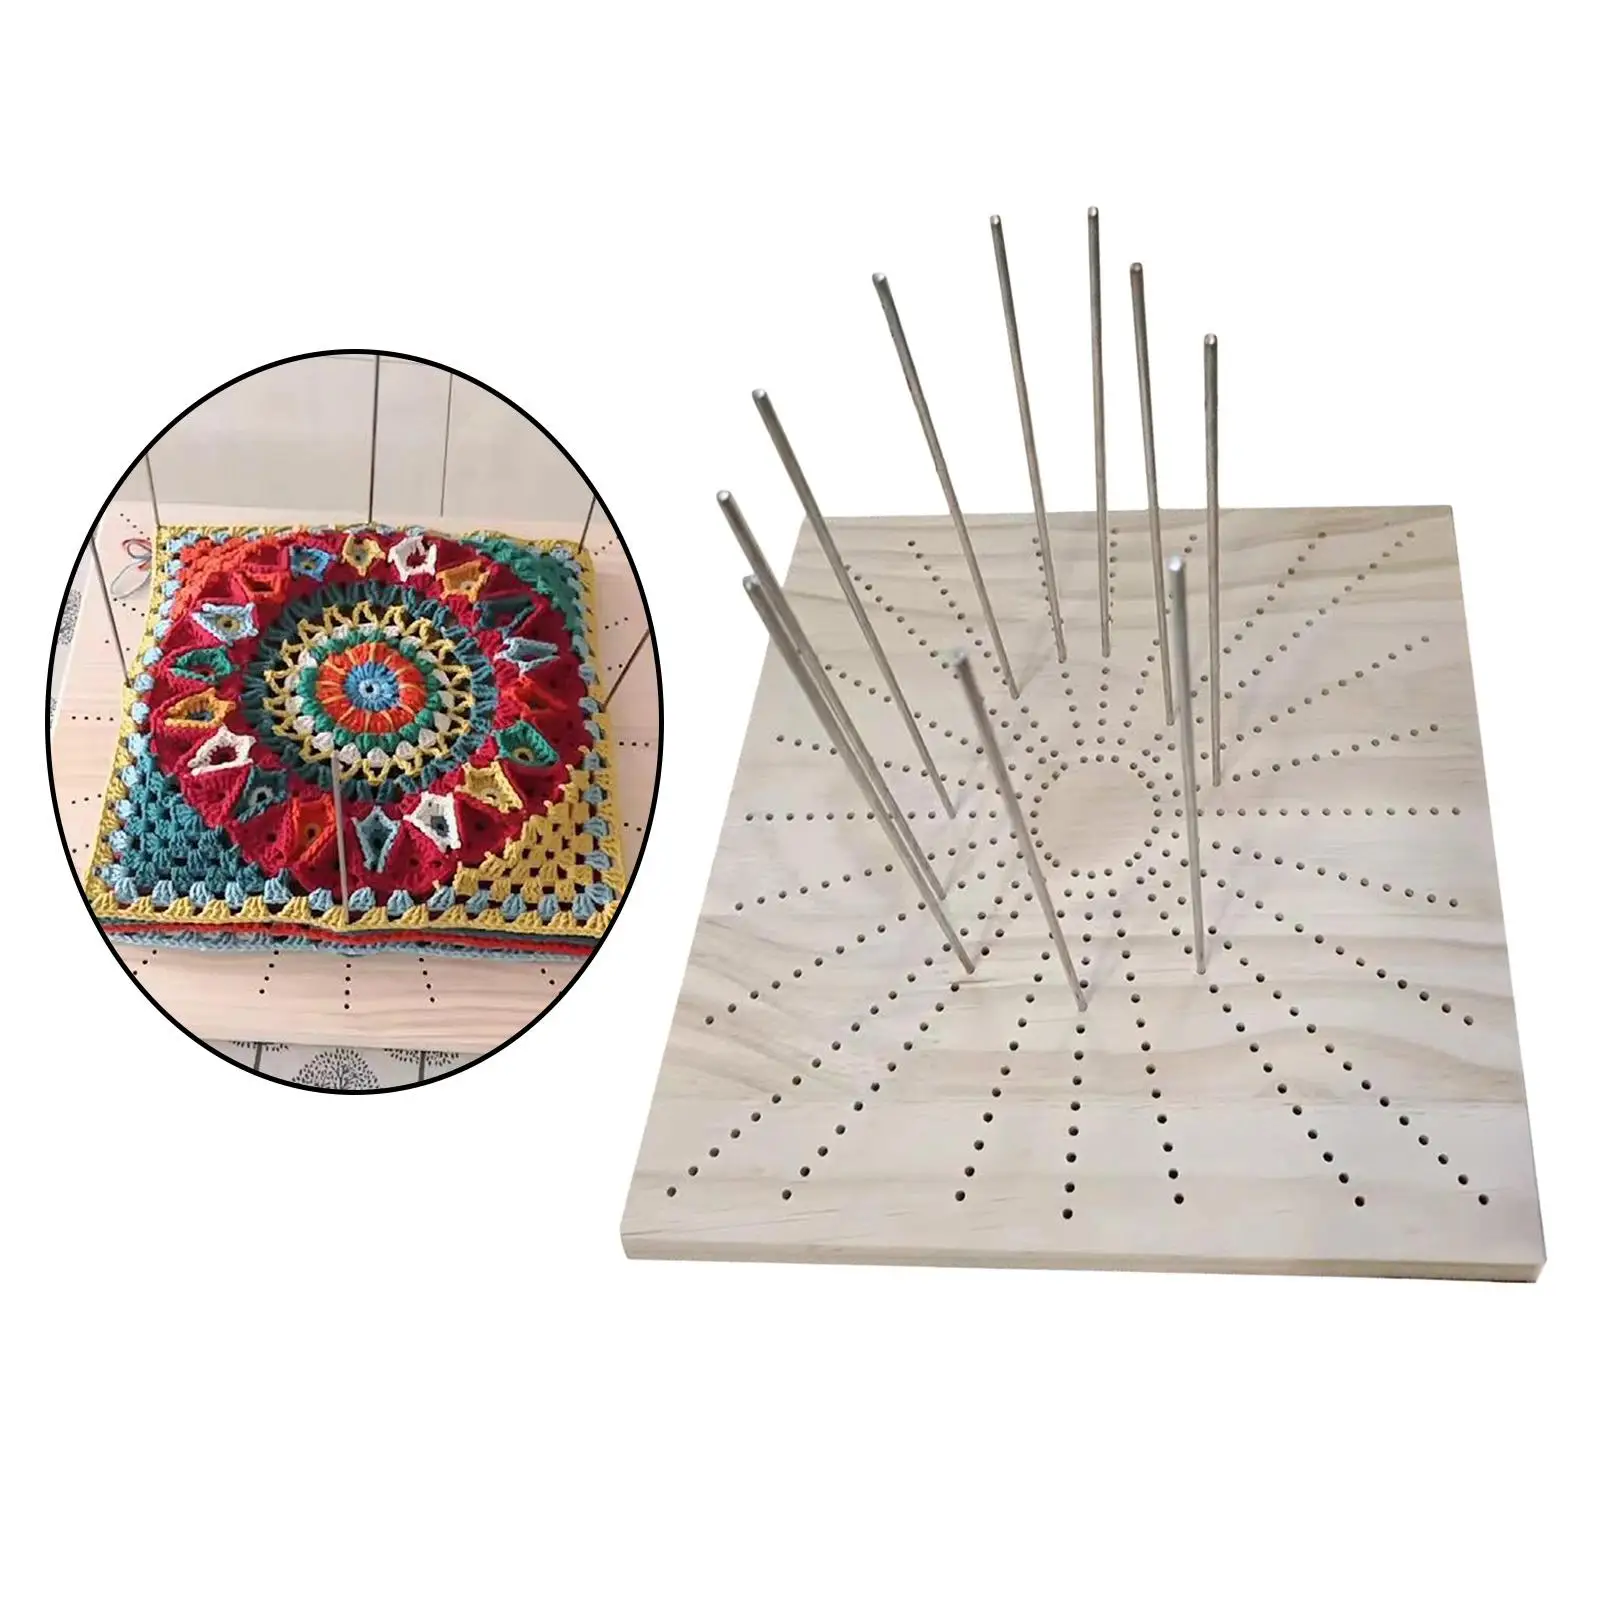 Crochet Blocking Board Unlimited Usages Wooden for Knitting and Crocheting